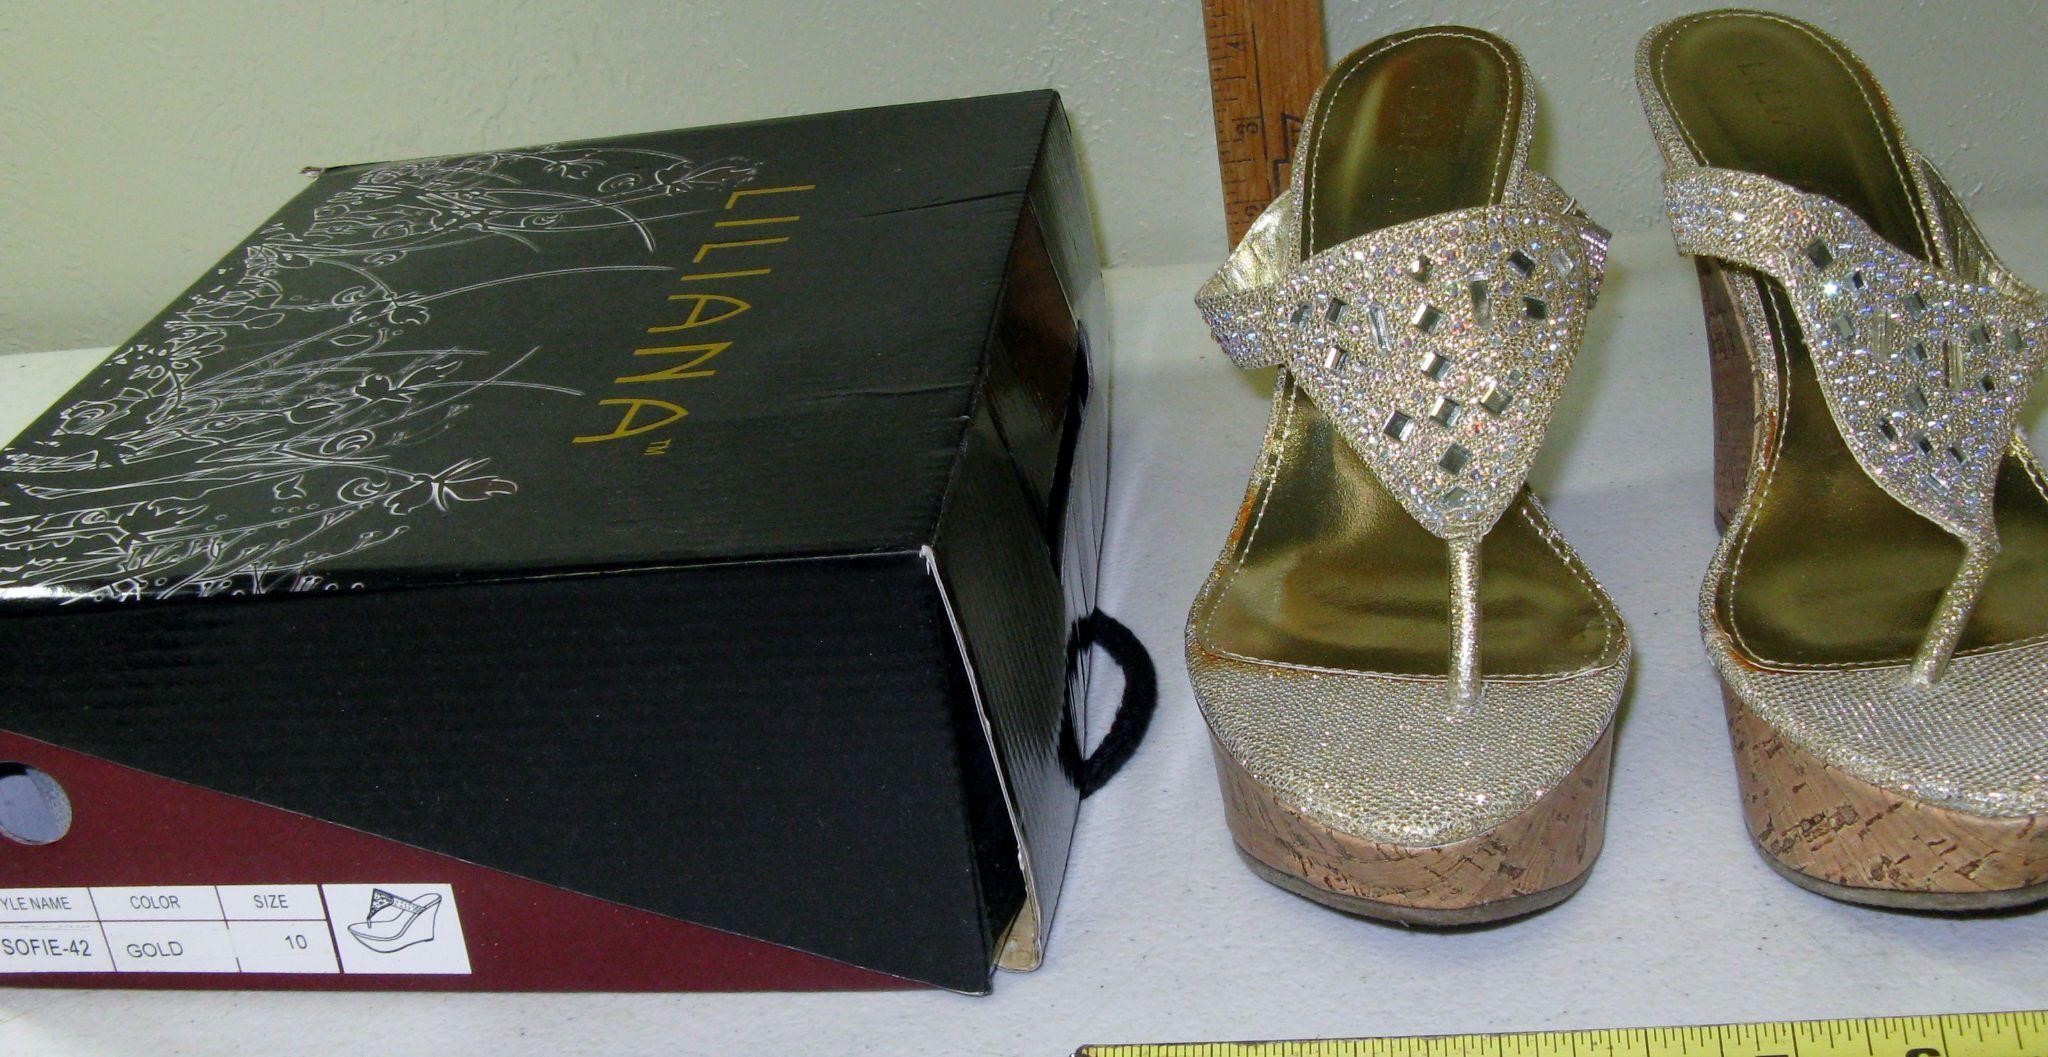 Ladies Liliana Sofie - 42 Gold Shoes Size 10